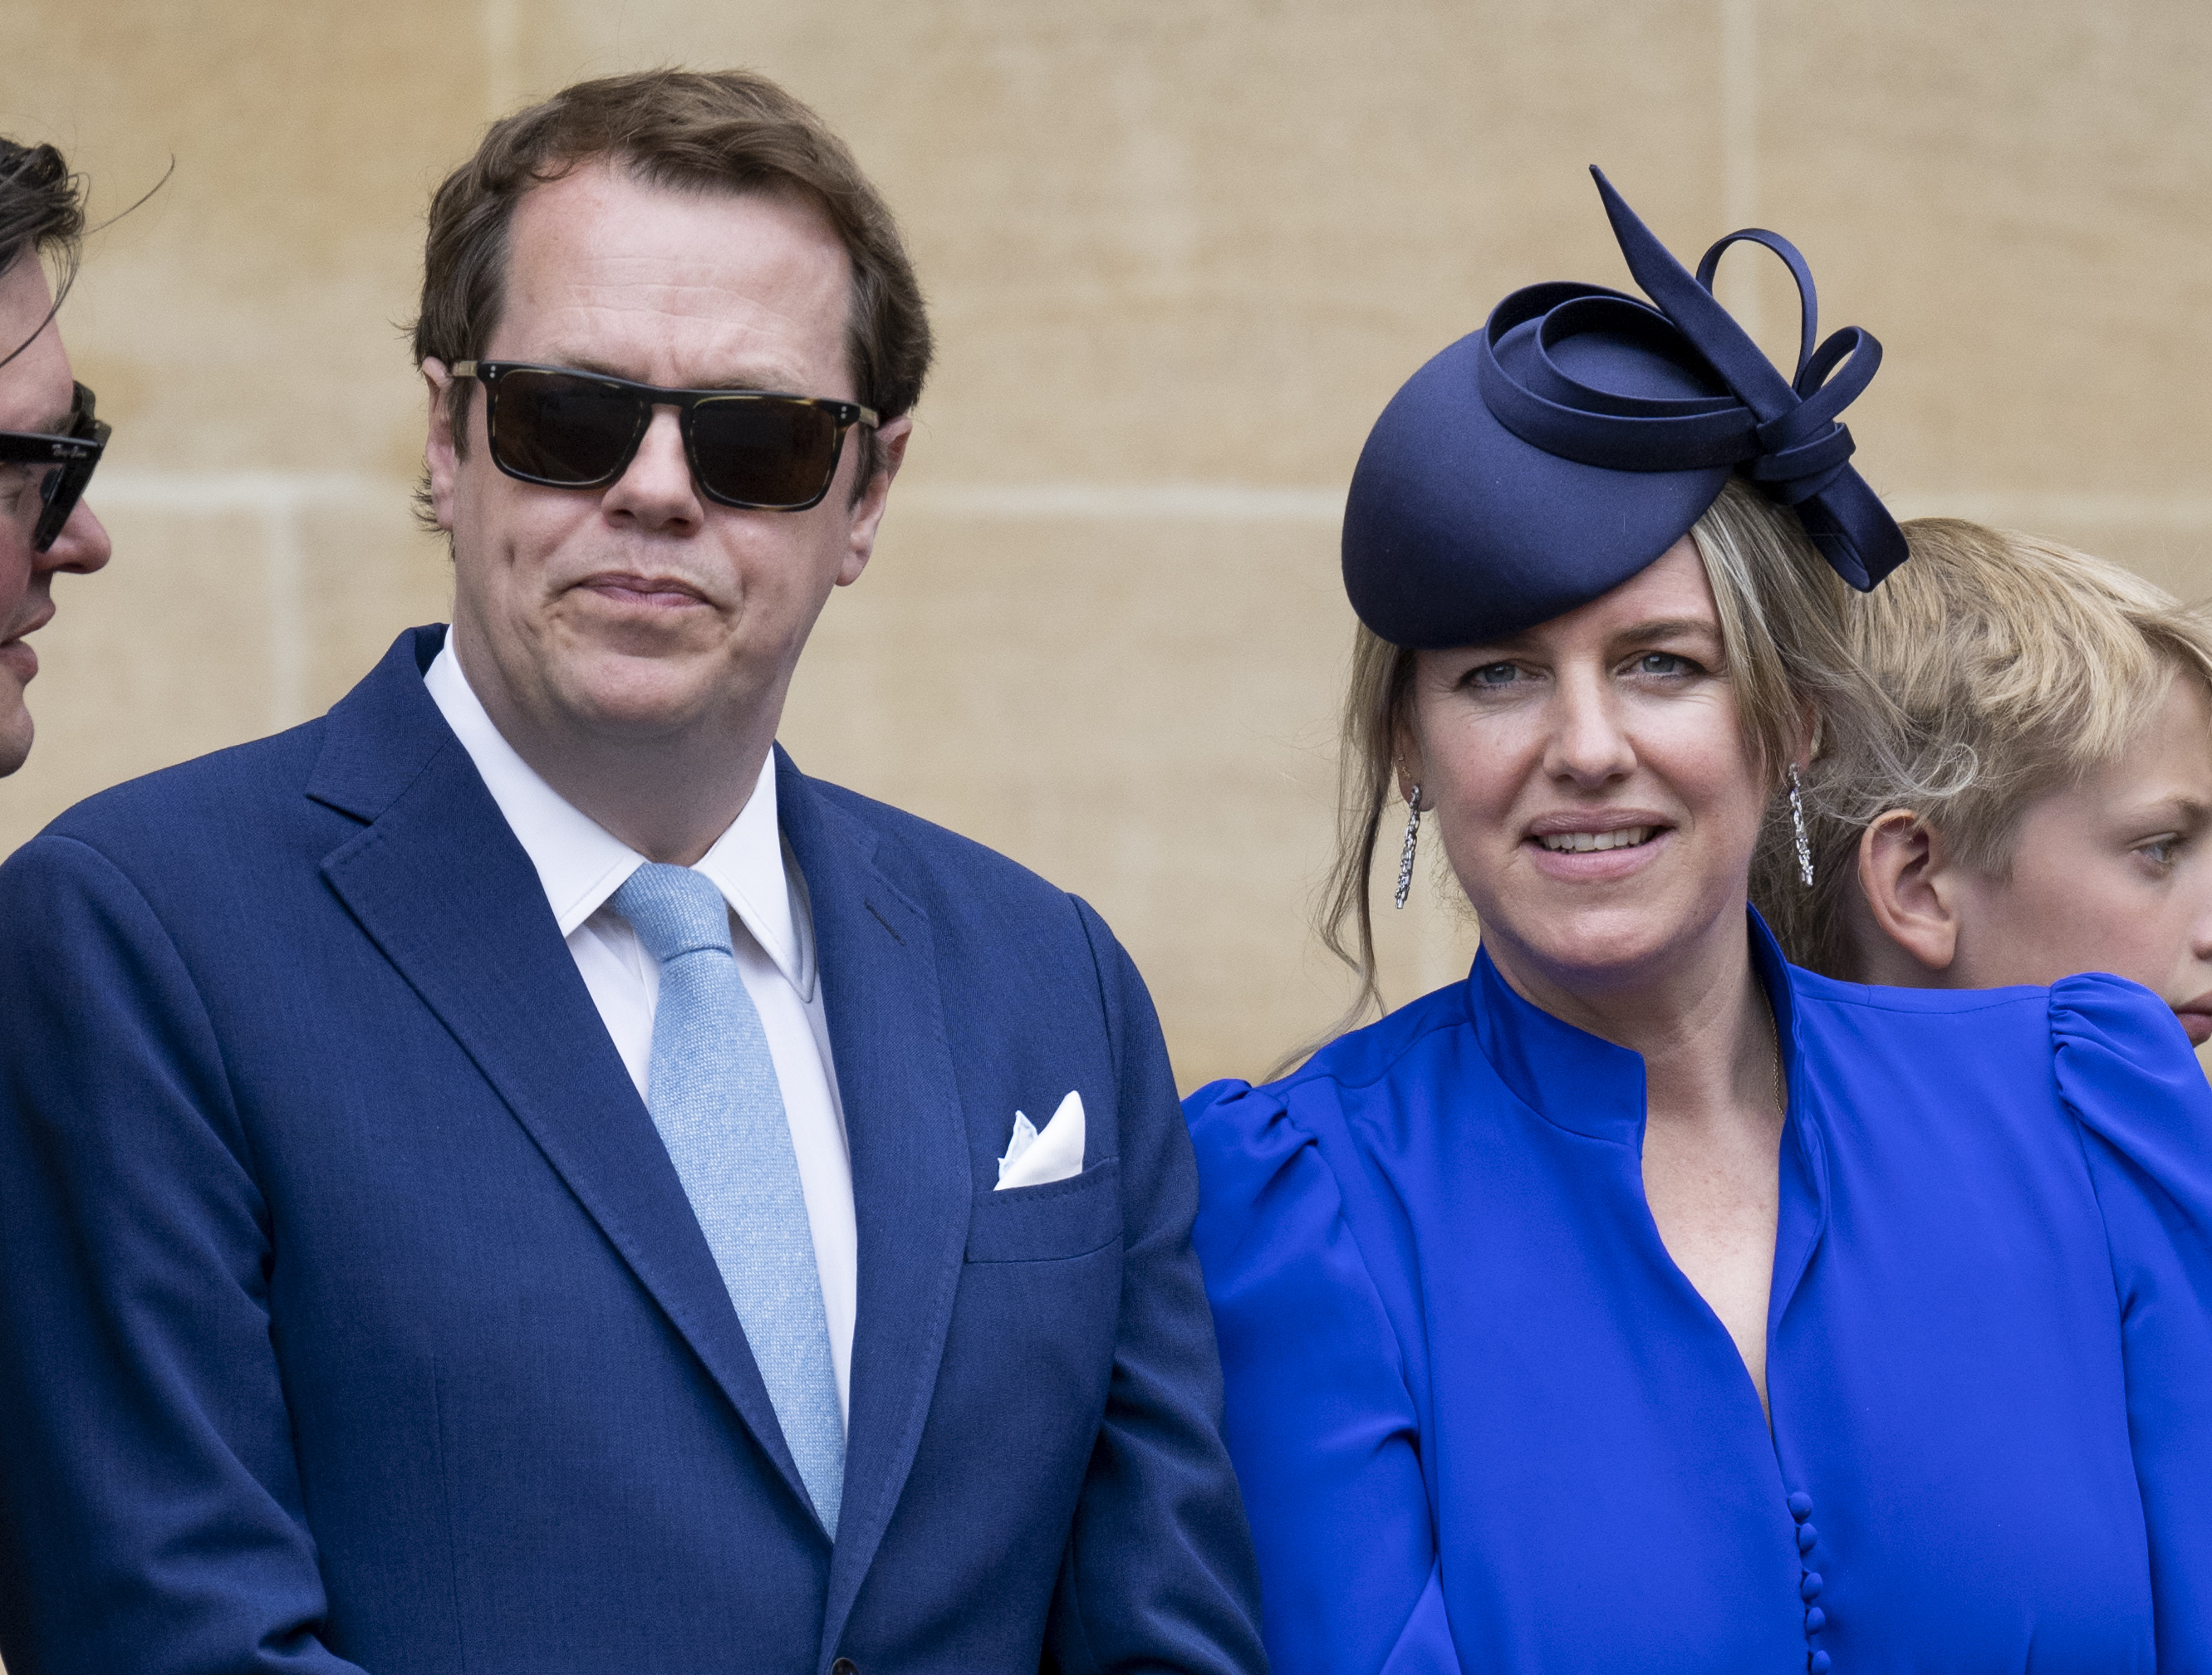 Laura Lopes and Tom Parker Bowles attend the Order of the Garter service in Windsor, England, on June 13, 2022. | Source: Getty Images